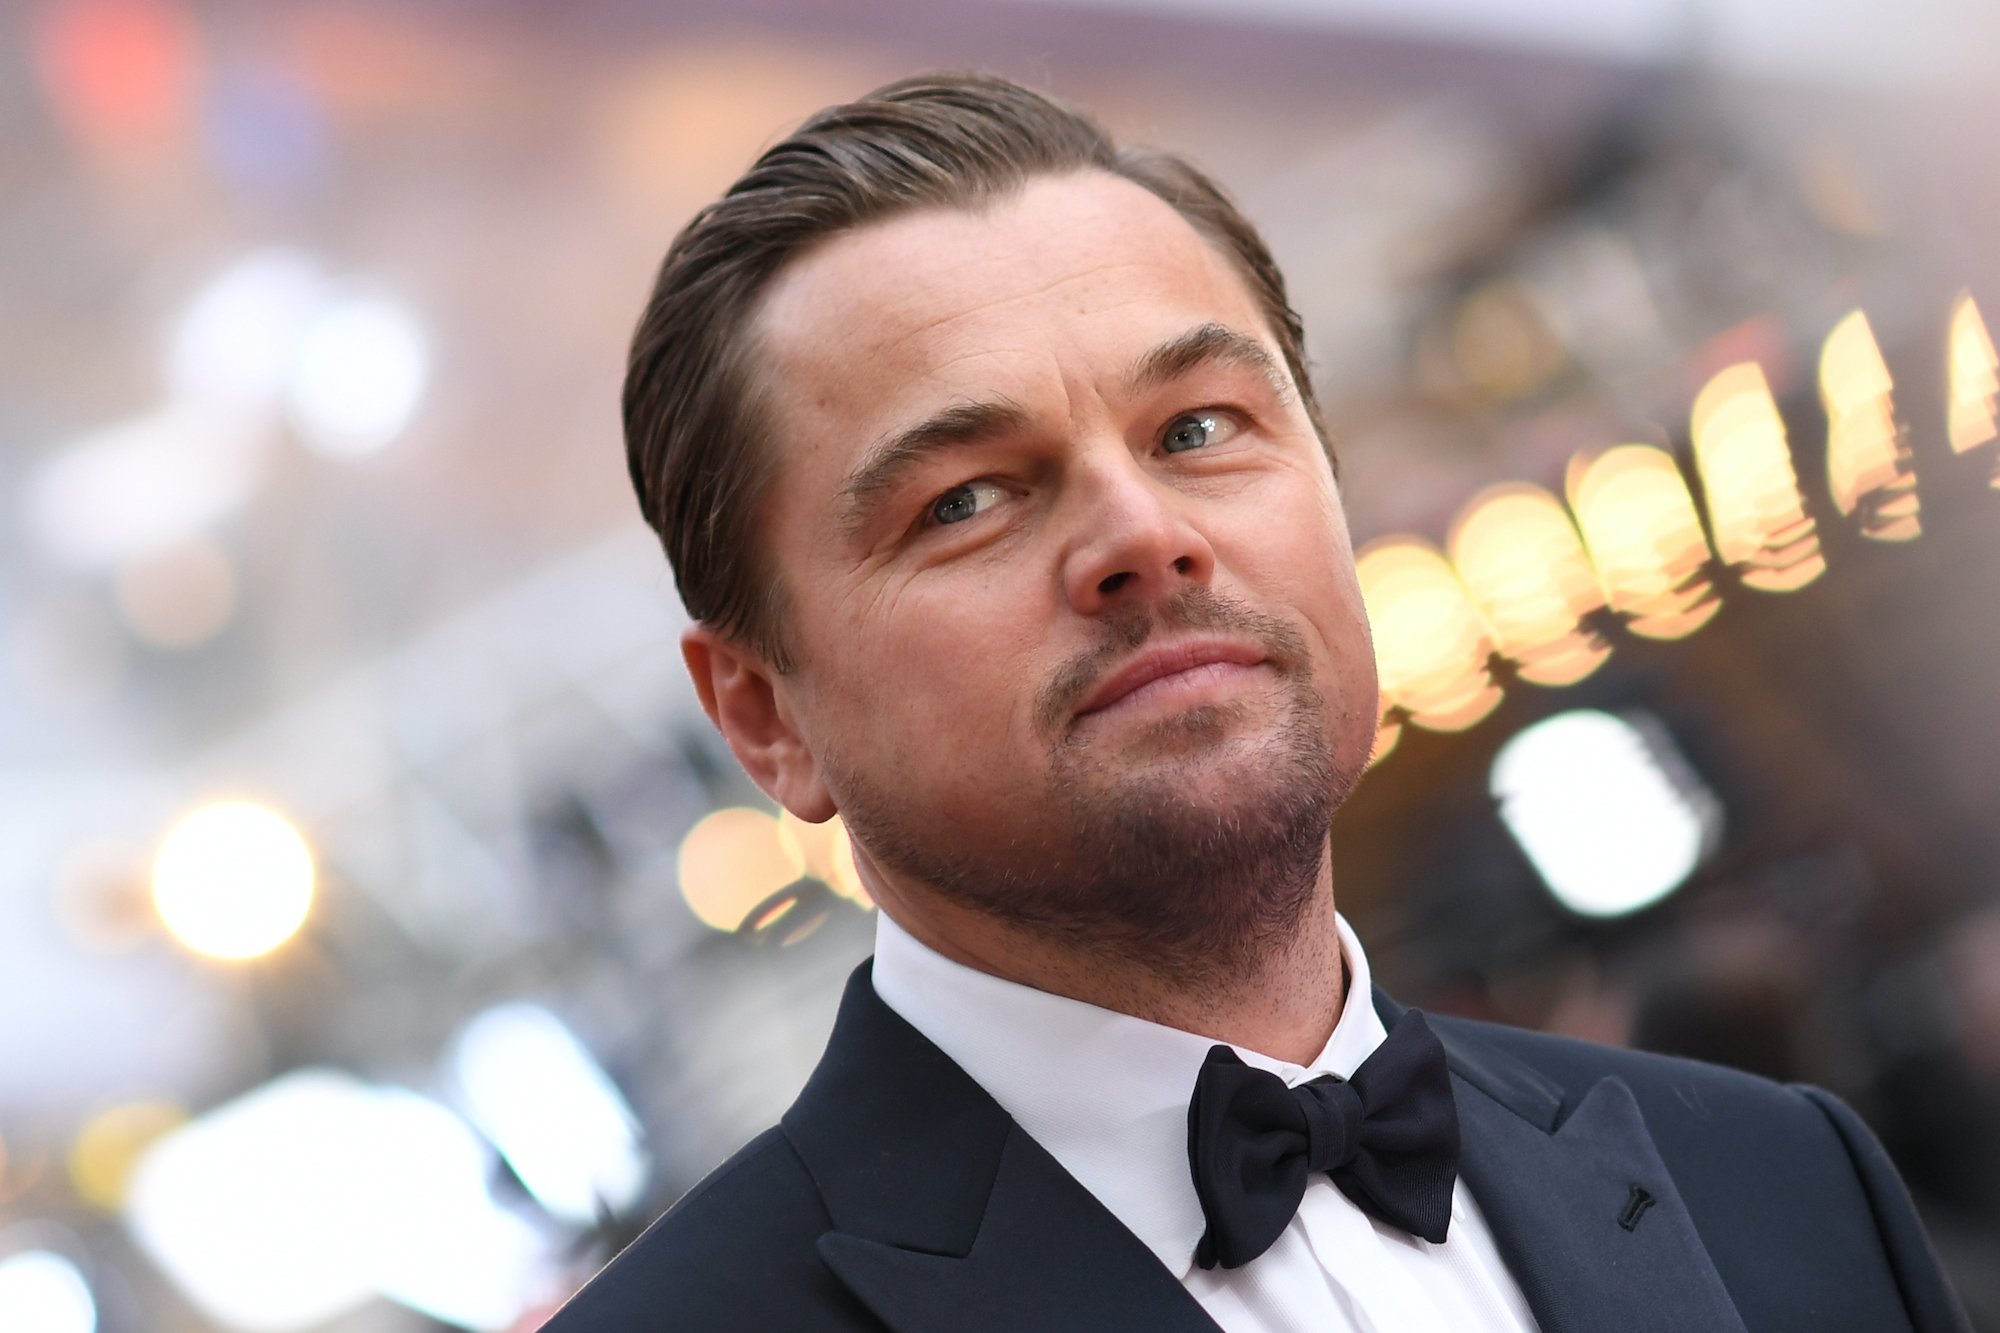 Leonardo DiCaprio Learned a Crucial Lesson While Filming Commercials as an Adorable Young Actor